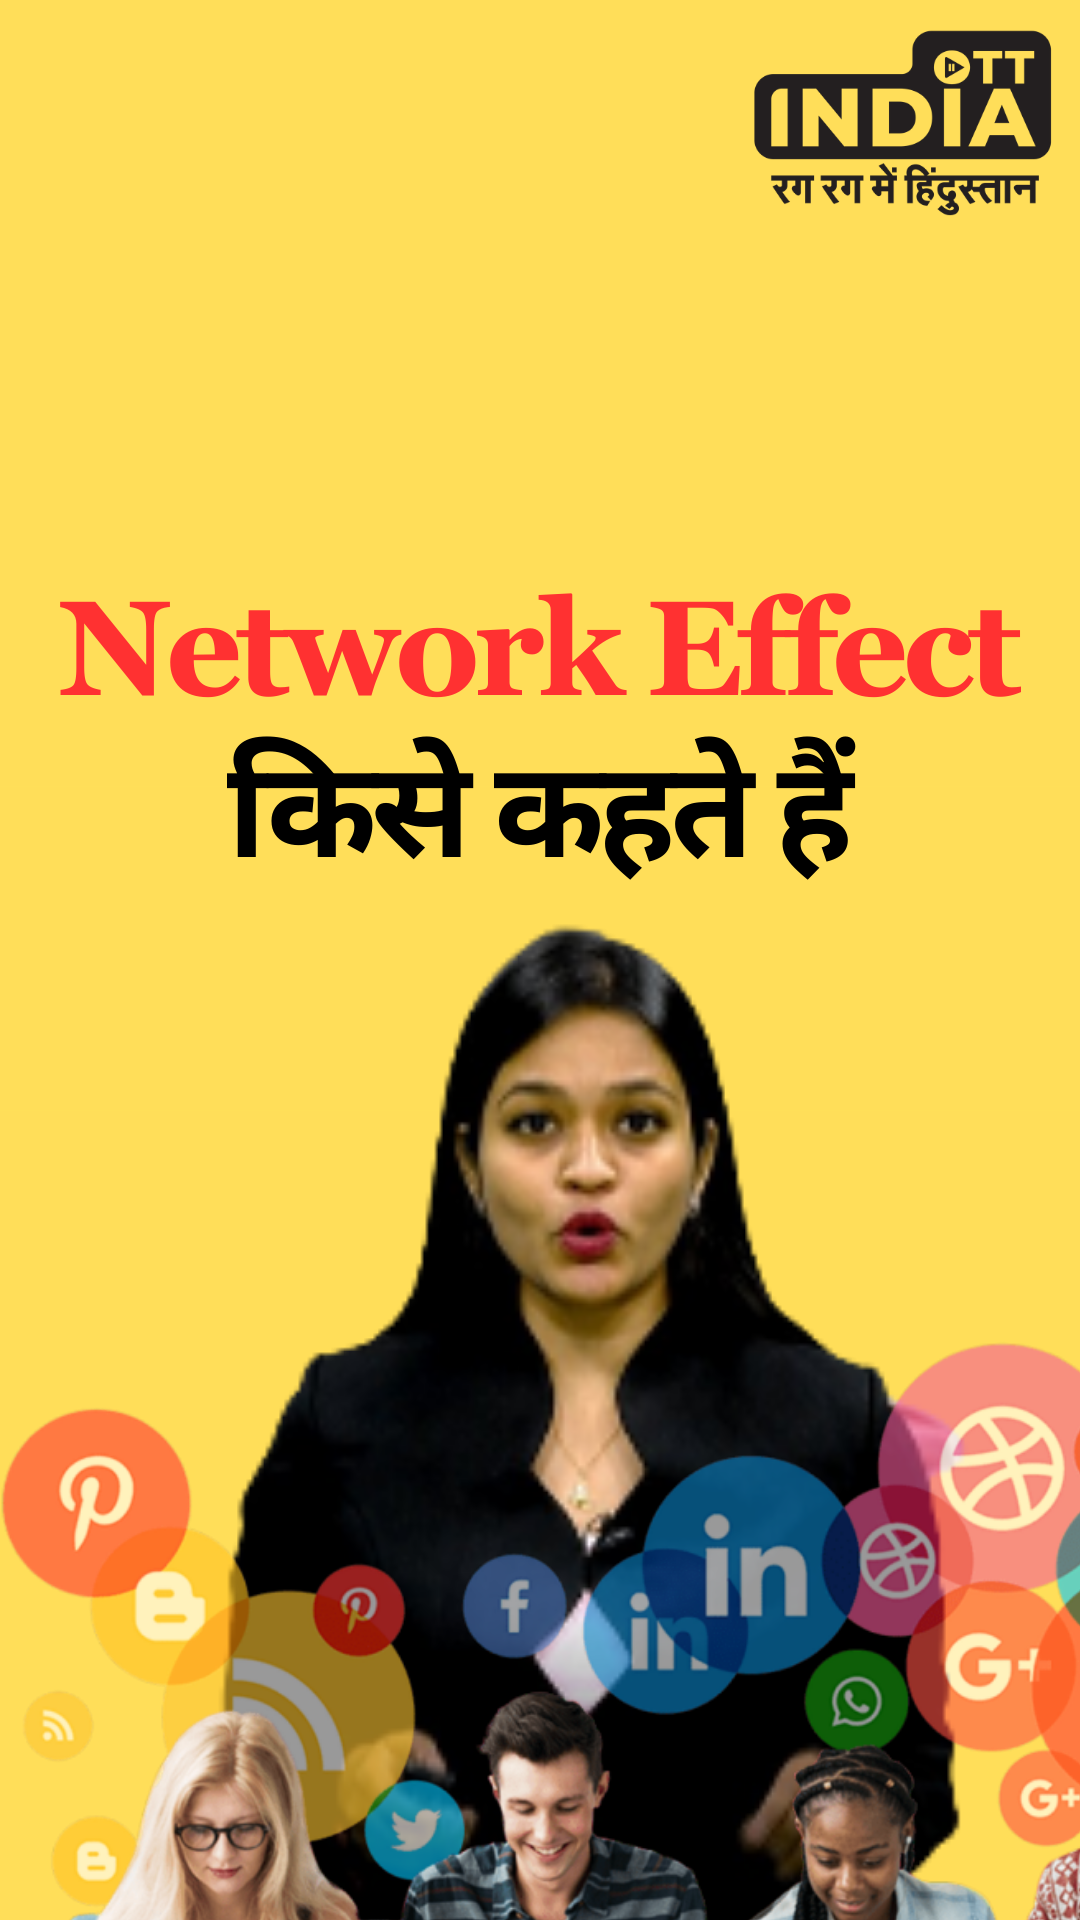 What is Network Effect?